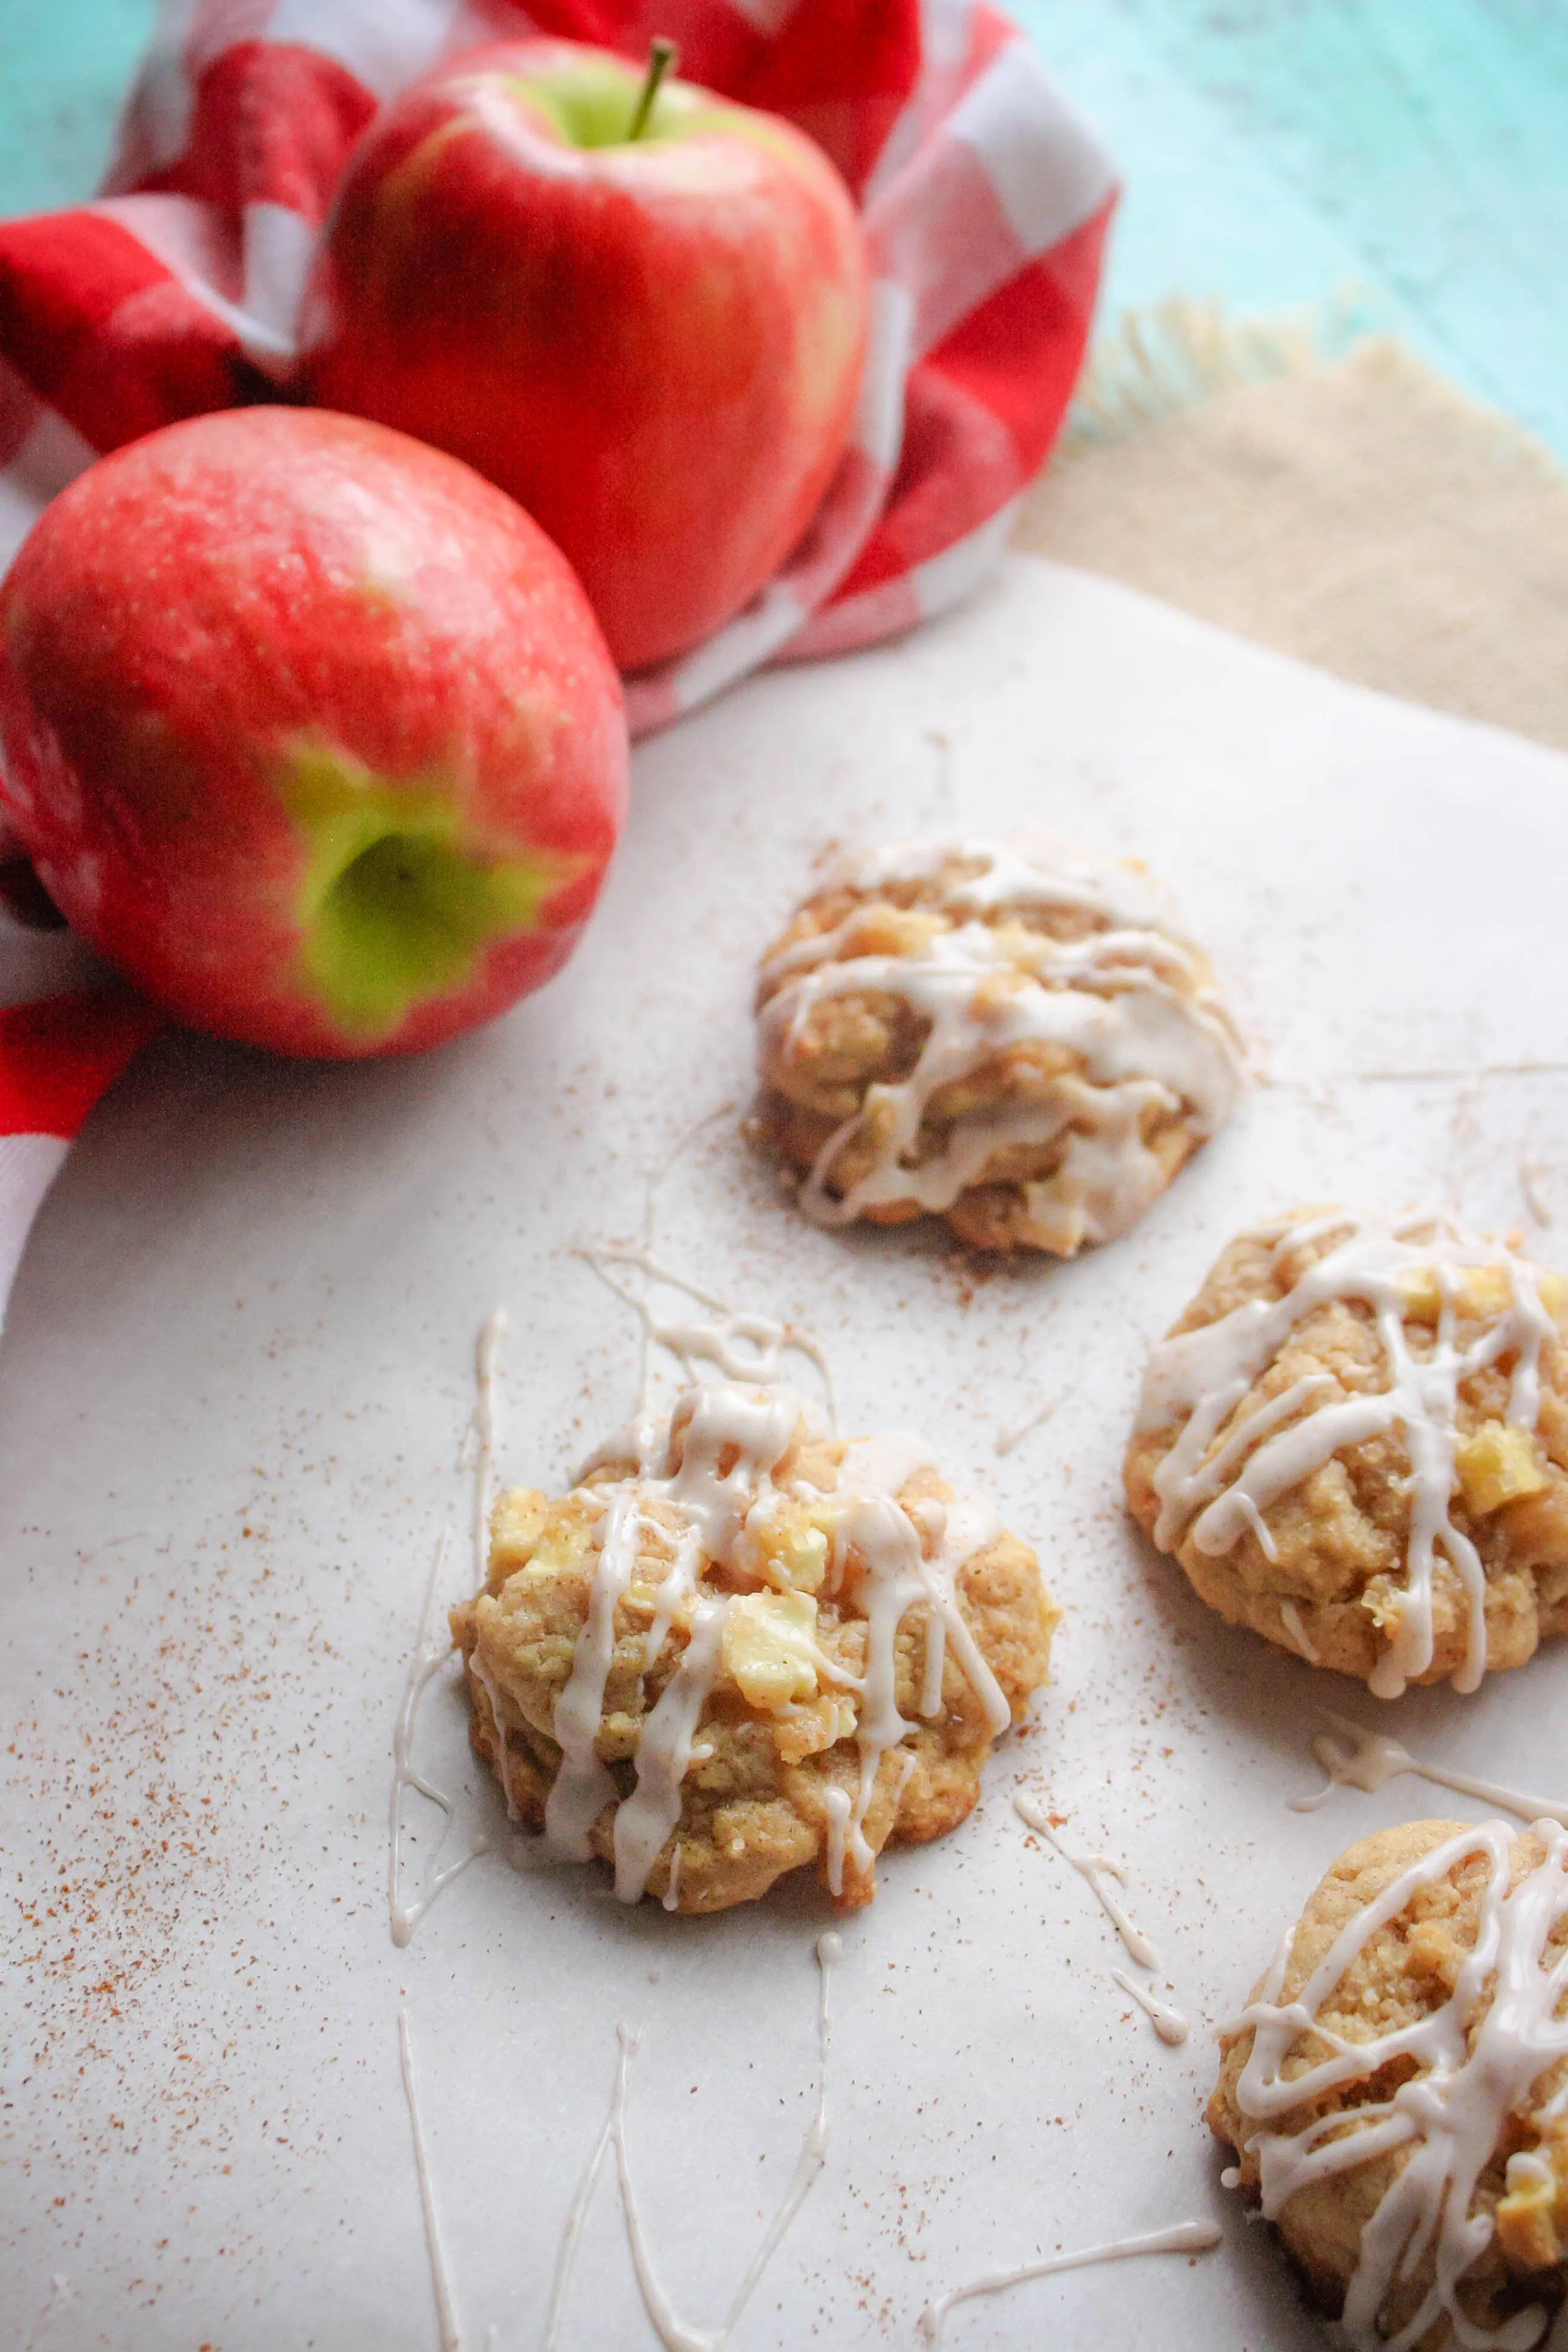 Apple Pie Cookies with Cinnamon Glaze are such flavorful cookies. Apple Pie Cookies with Cinnamon Glaze include simple ingredients for big flavor.